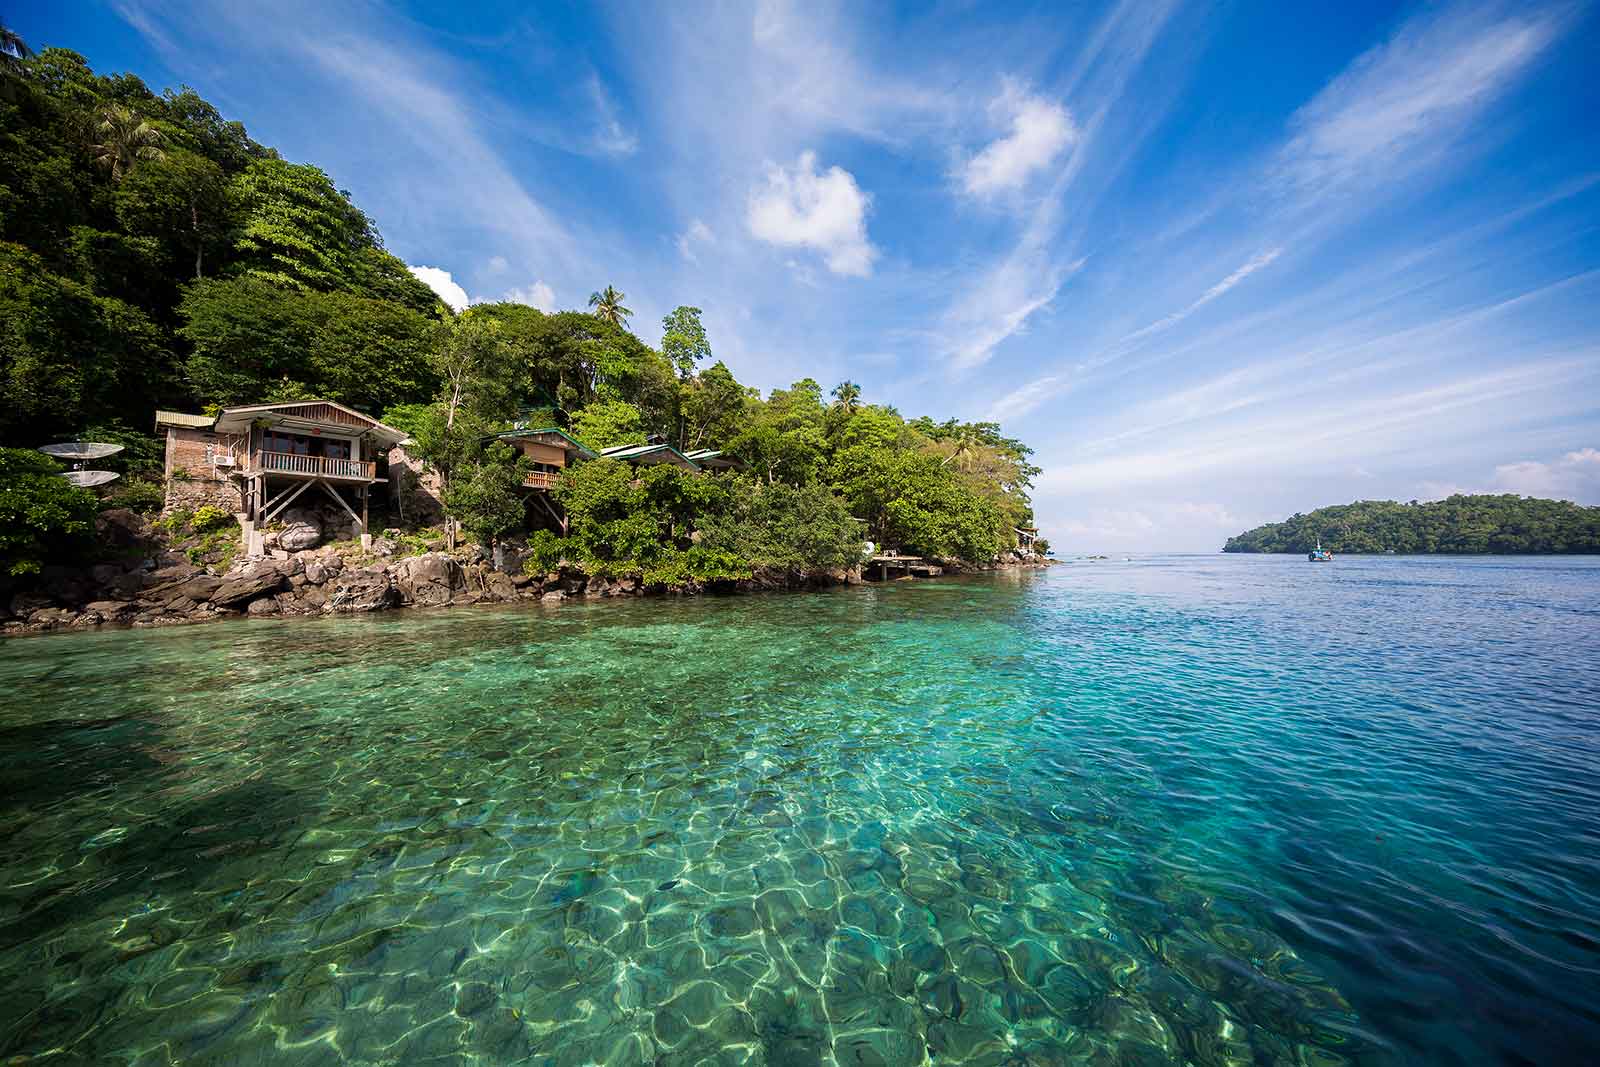 You'll find various hotels across Pulau Weh, but the largest cluster is in the village of Iboih near the best dive sites. It's a beautiful place to stay at, but also the most crowded and although the water is crystal clear, the stunning beaches can be found somewhere else.